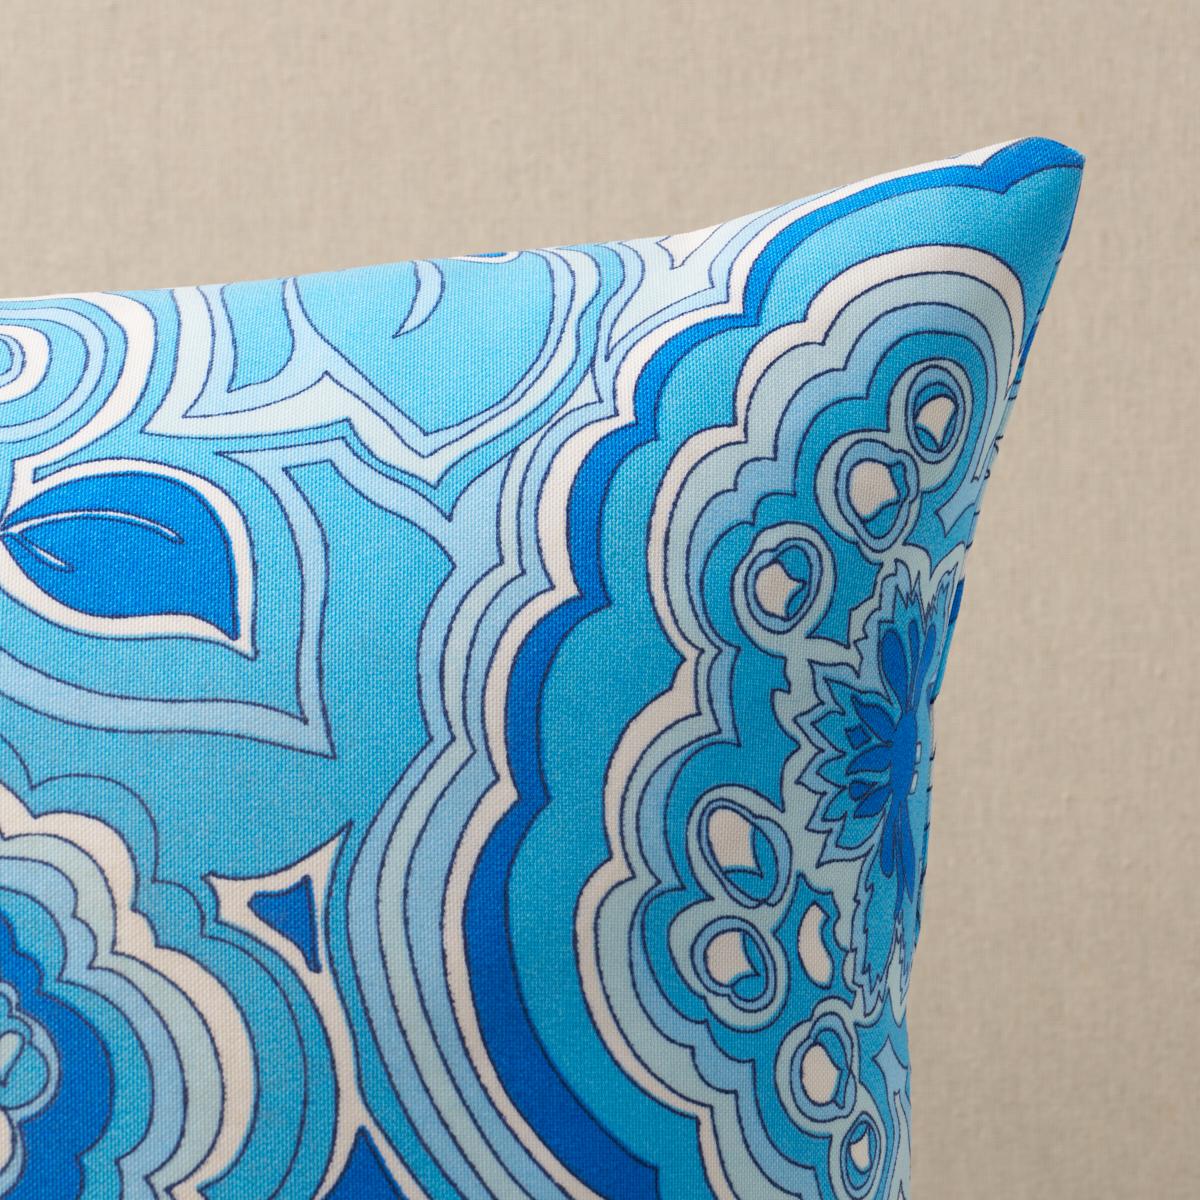 This pillow features Morning Sunrise Indoor/Outdoor by Trina Turk with a knife edge finish. Created by Trina Turk, Morning Sunrise Print Indoor/Outdoor fabric is a fashion-inspired abstract floral with a groovy retro vibe. Pillow includes a polyfill